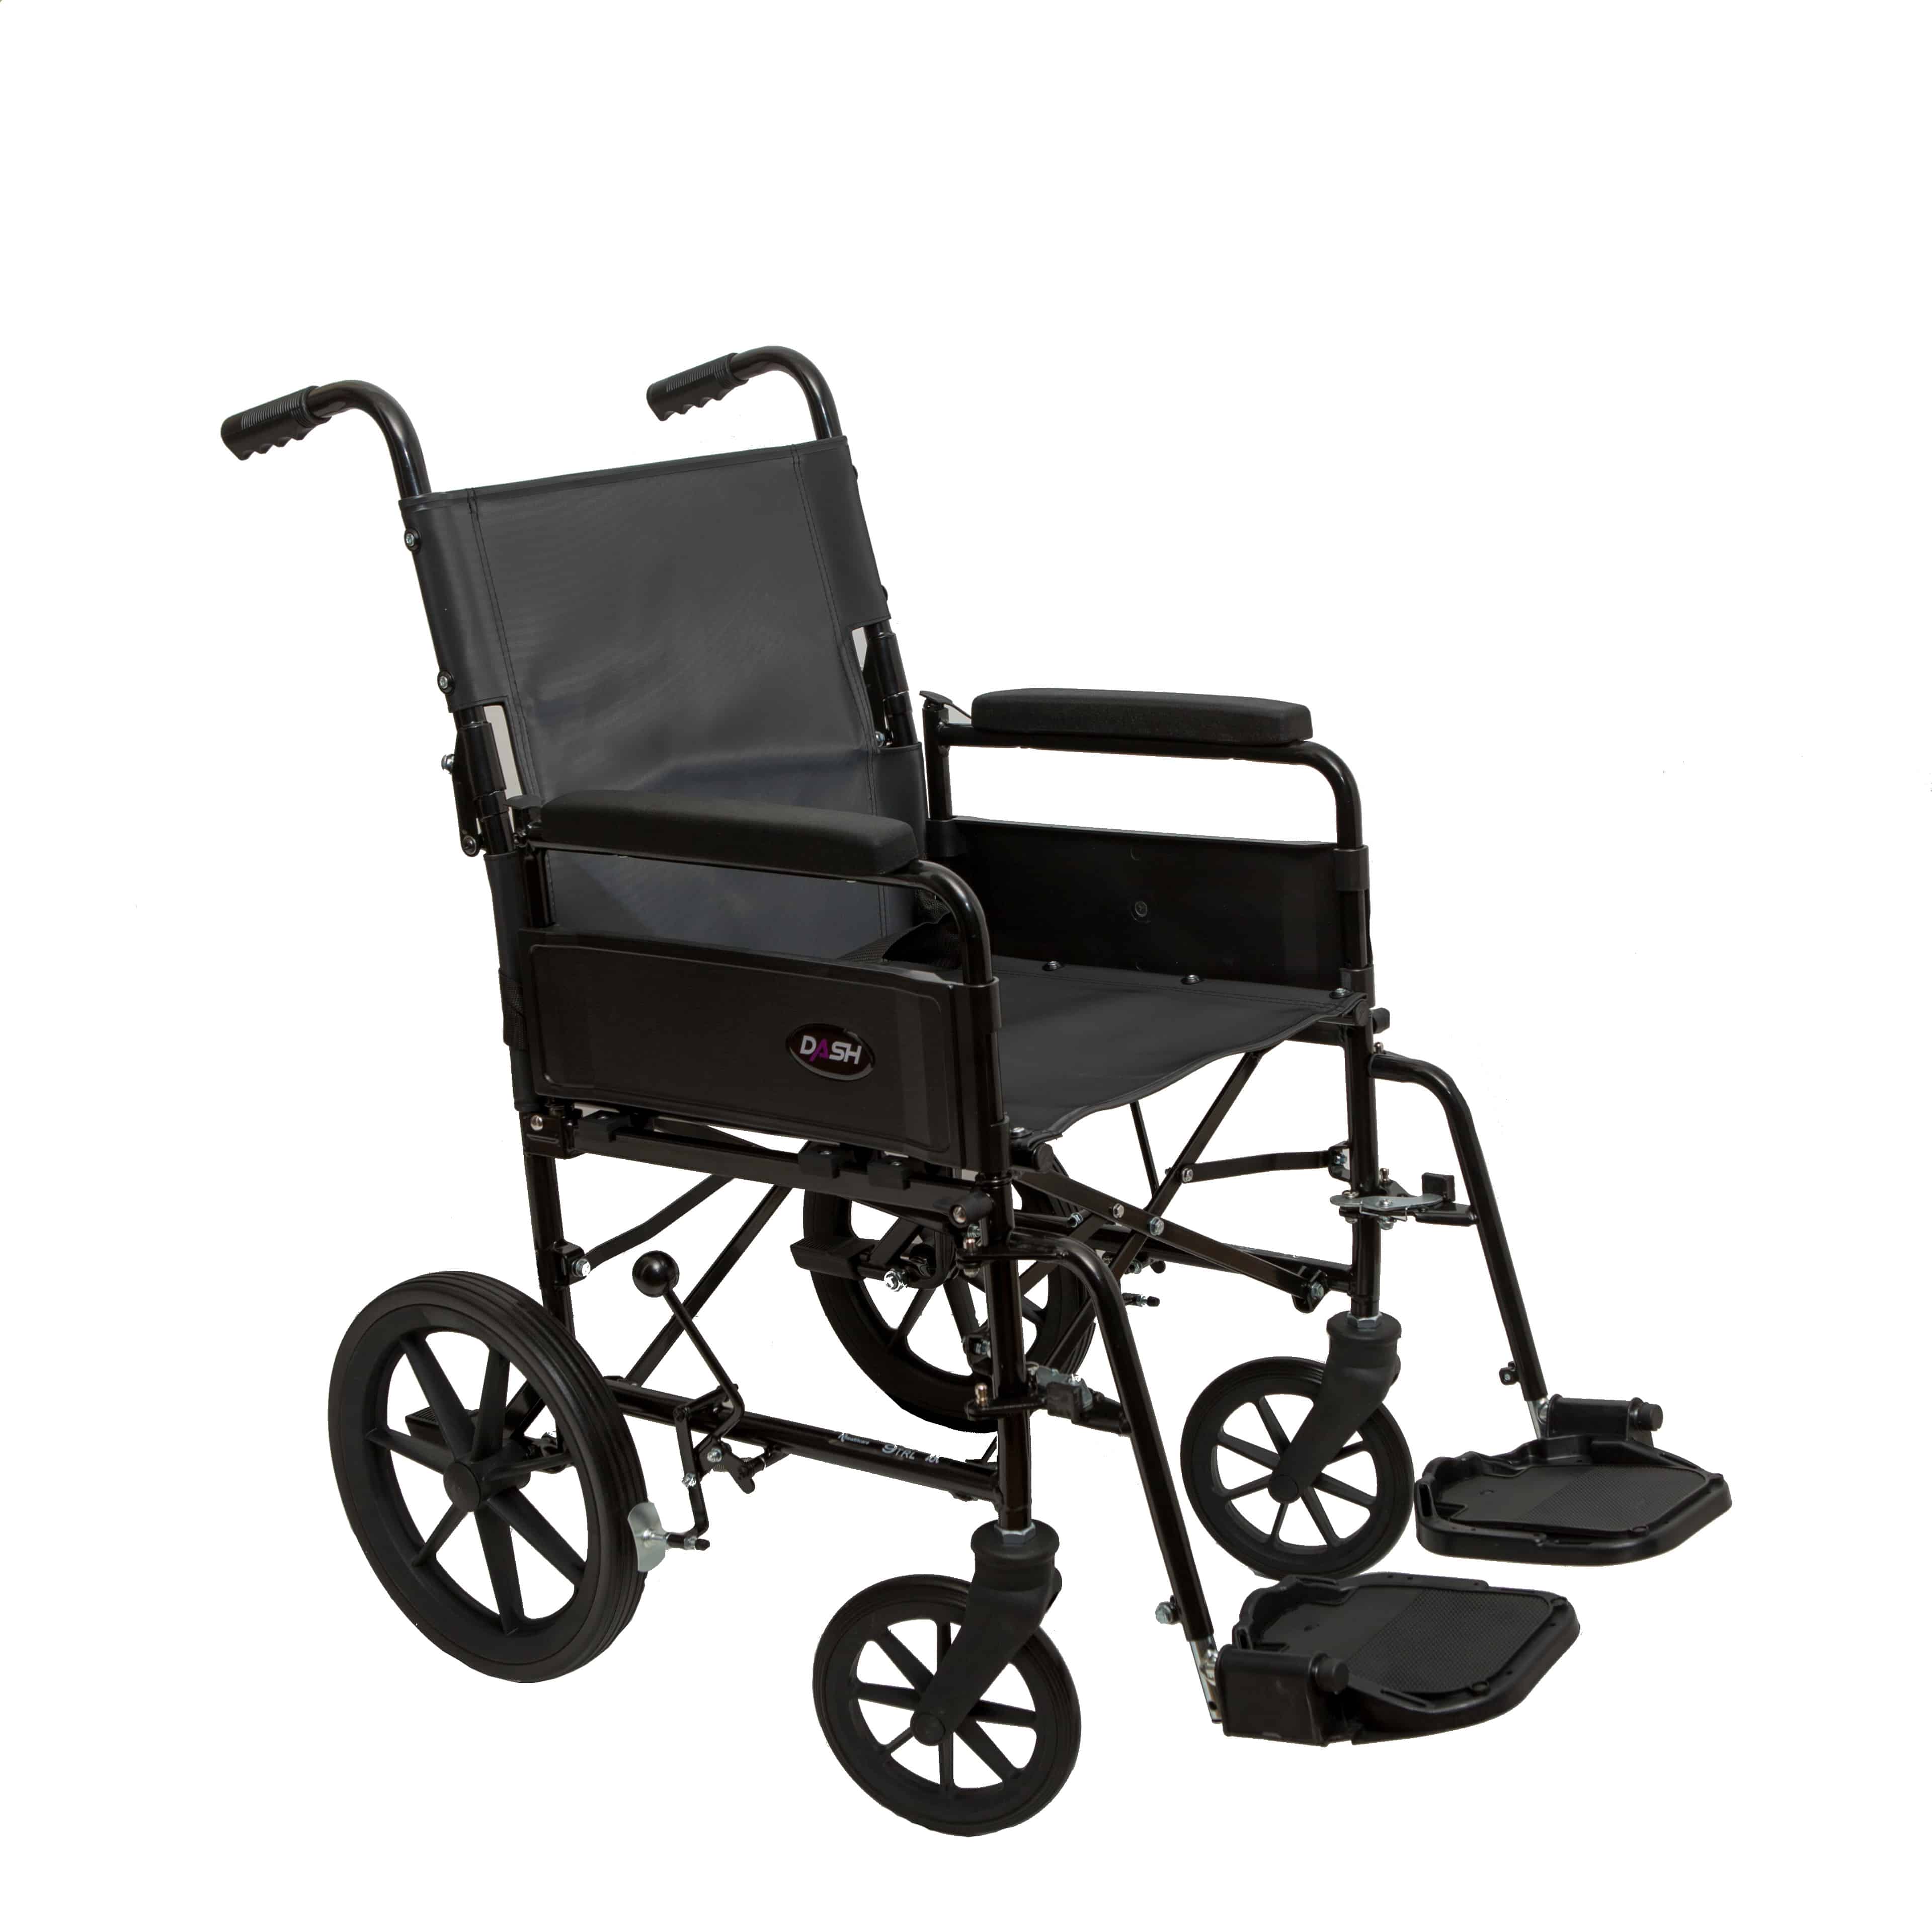 Webster 9TRL: General Purpose Folding Back Attendant Propelled Wheelchair -  Webster Wheelchairs